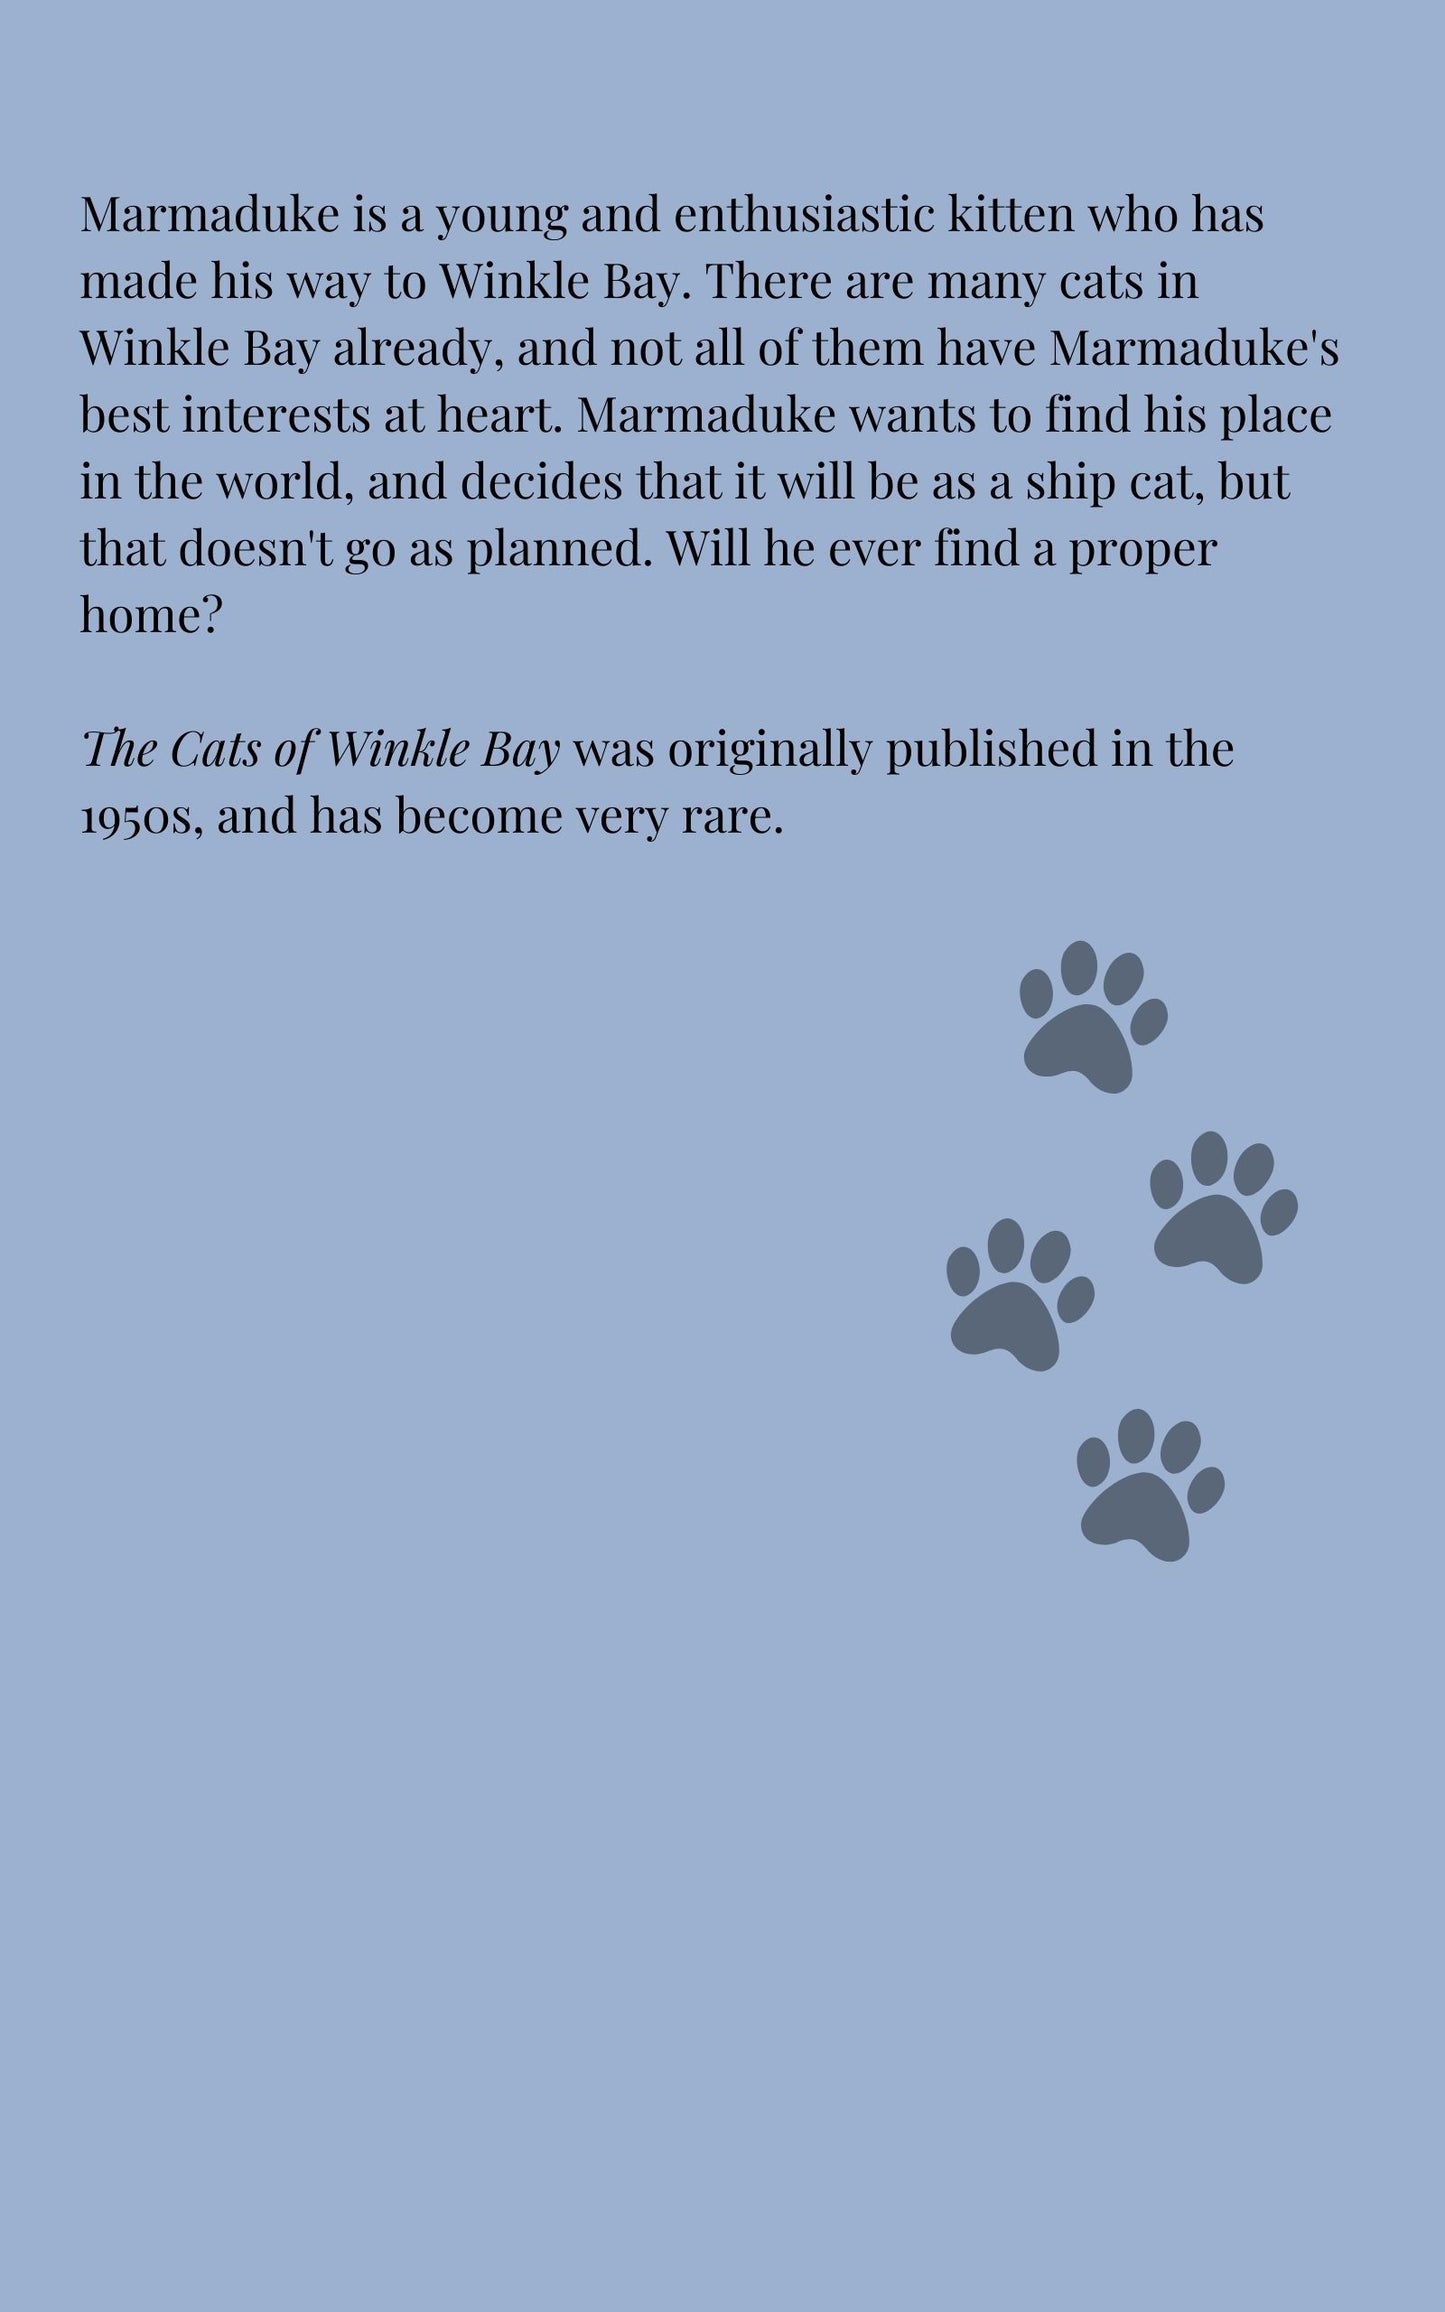 Judith M Berrisford: The Cats of Winkle Bay (eBook)